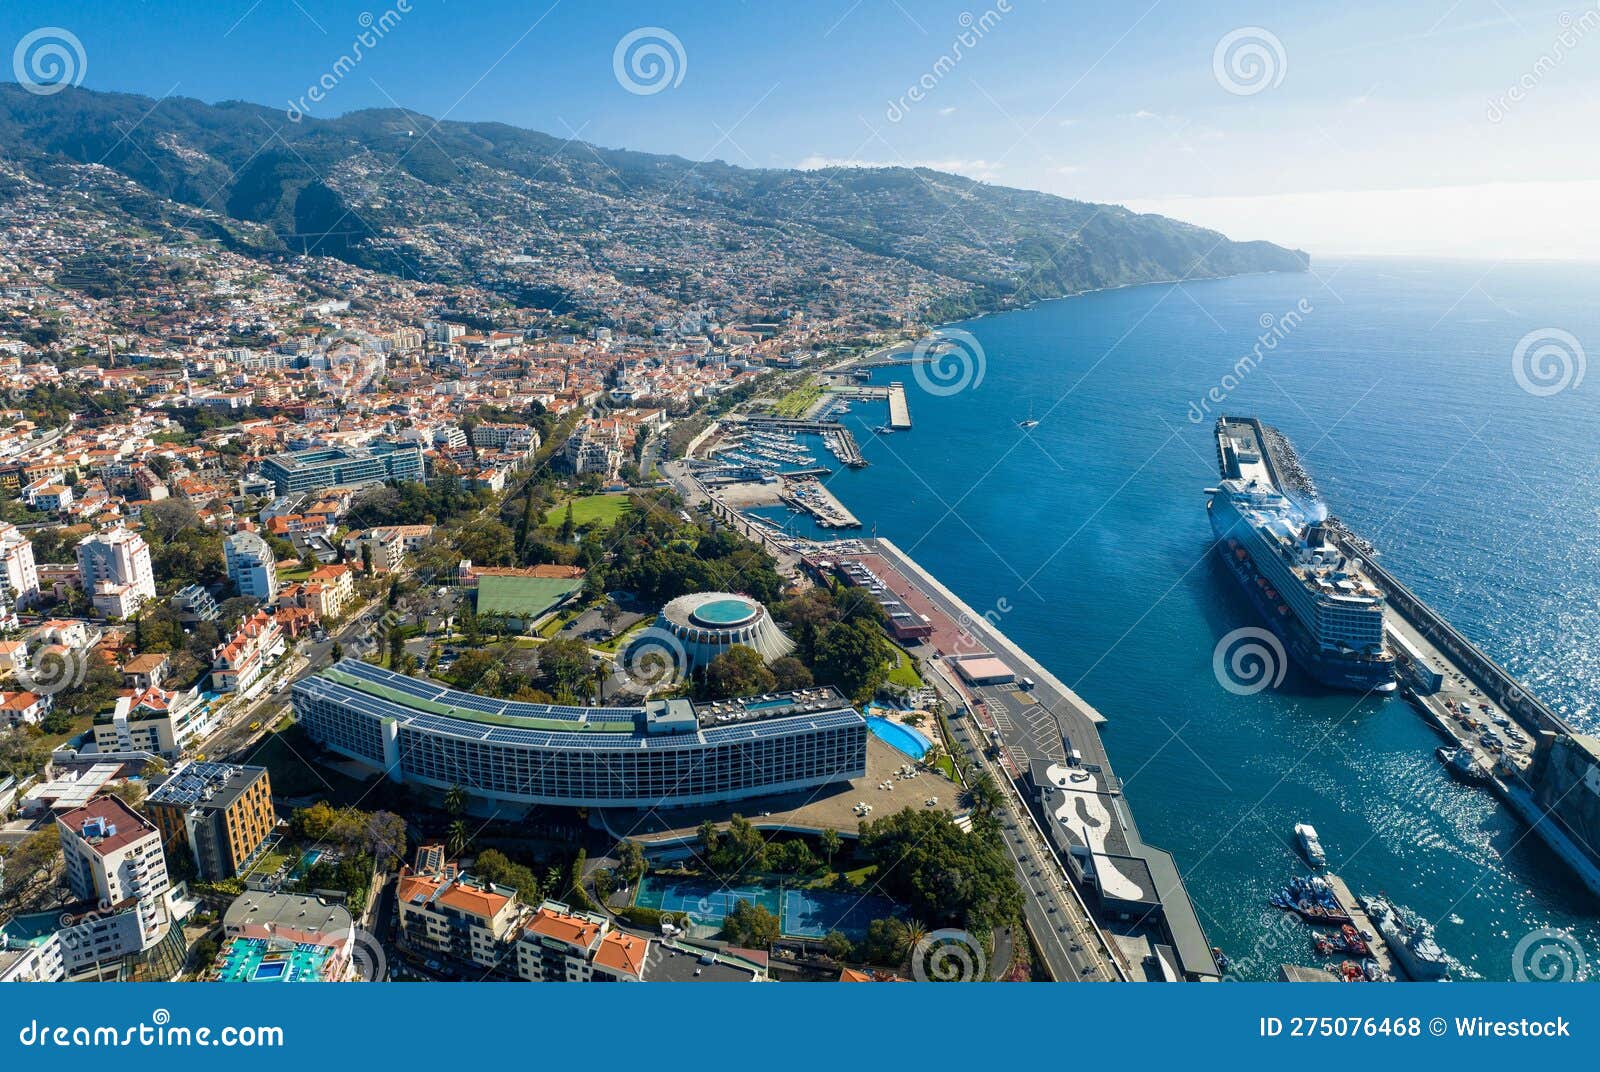 panoramic aerial view over funchal bay, madeira island, portugal